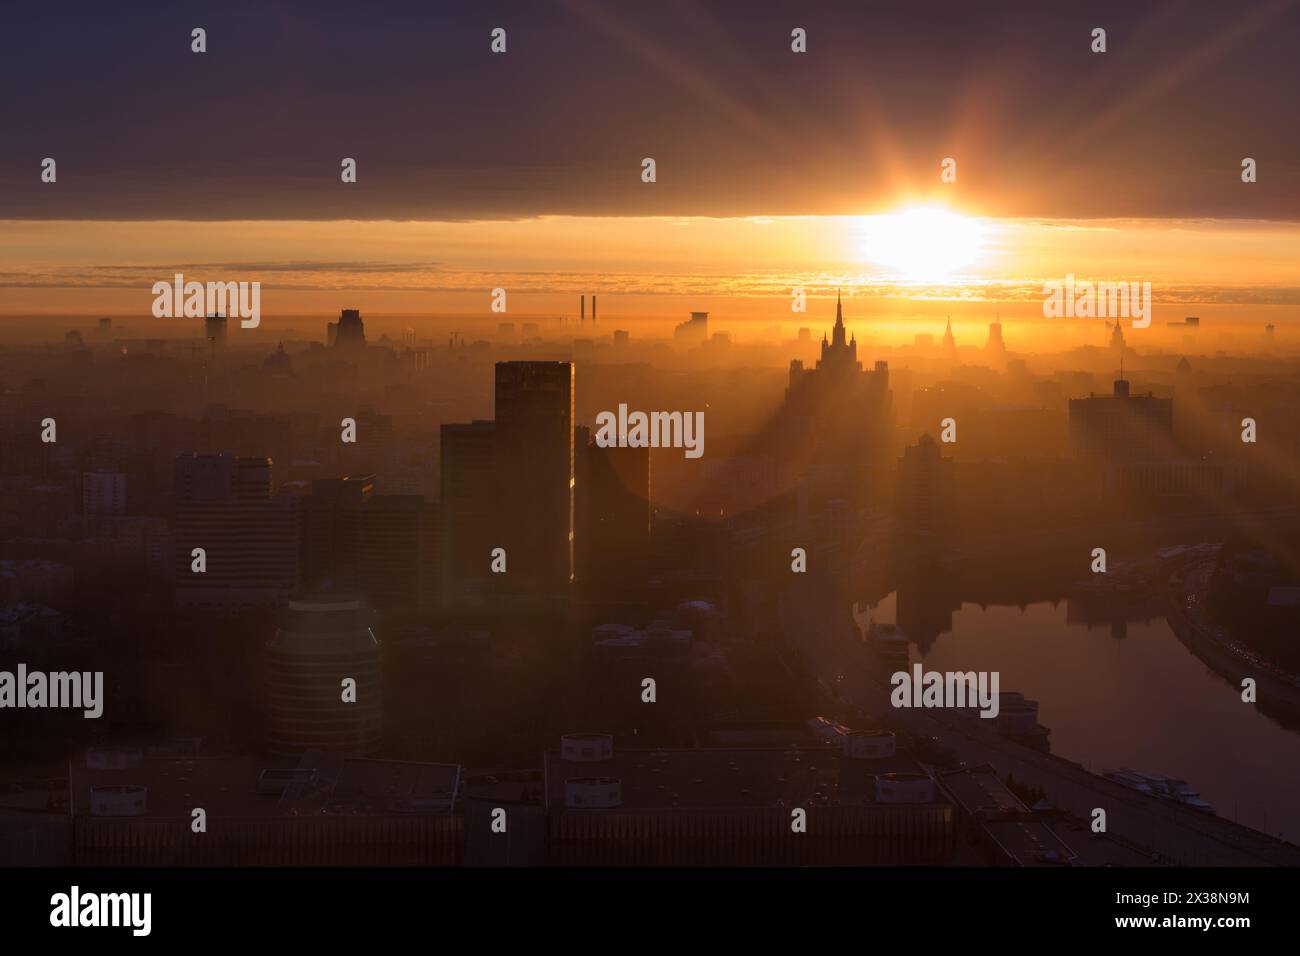 Silhouettes of buildings, Stalin skyscrapers and panorama of city during sunrise in Moscow, Russia Stock Photo